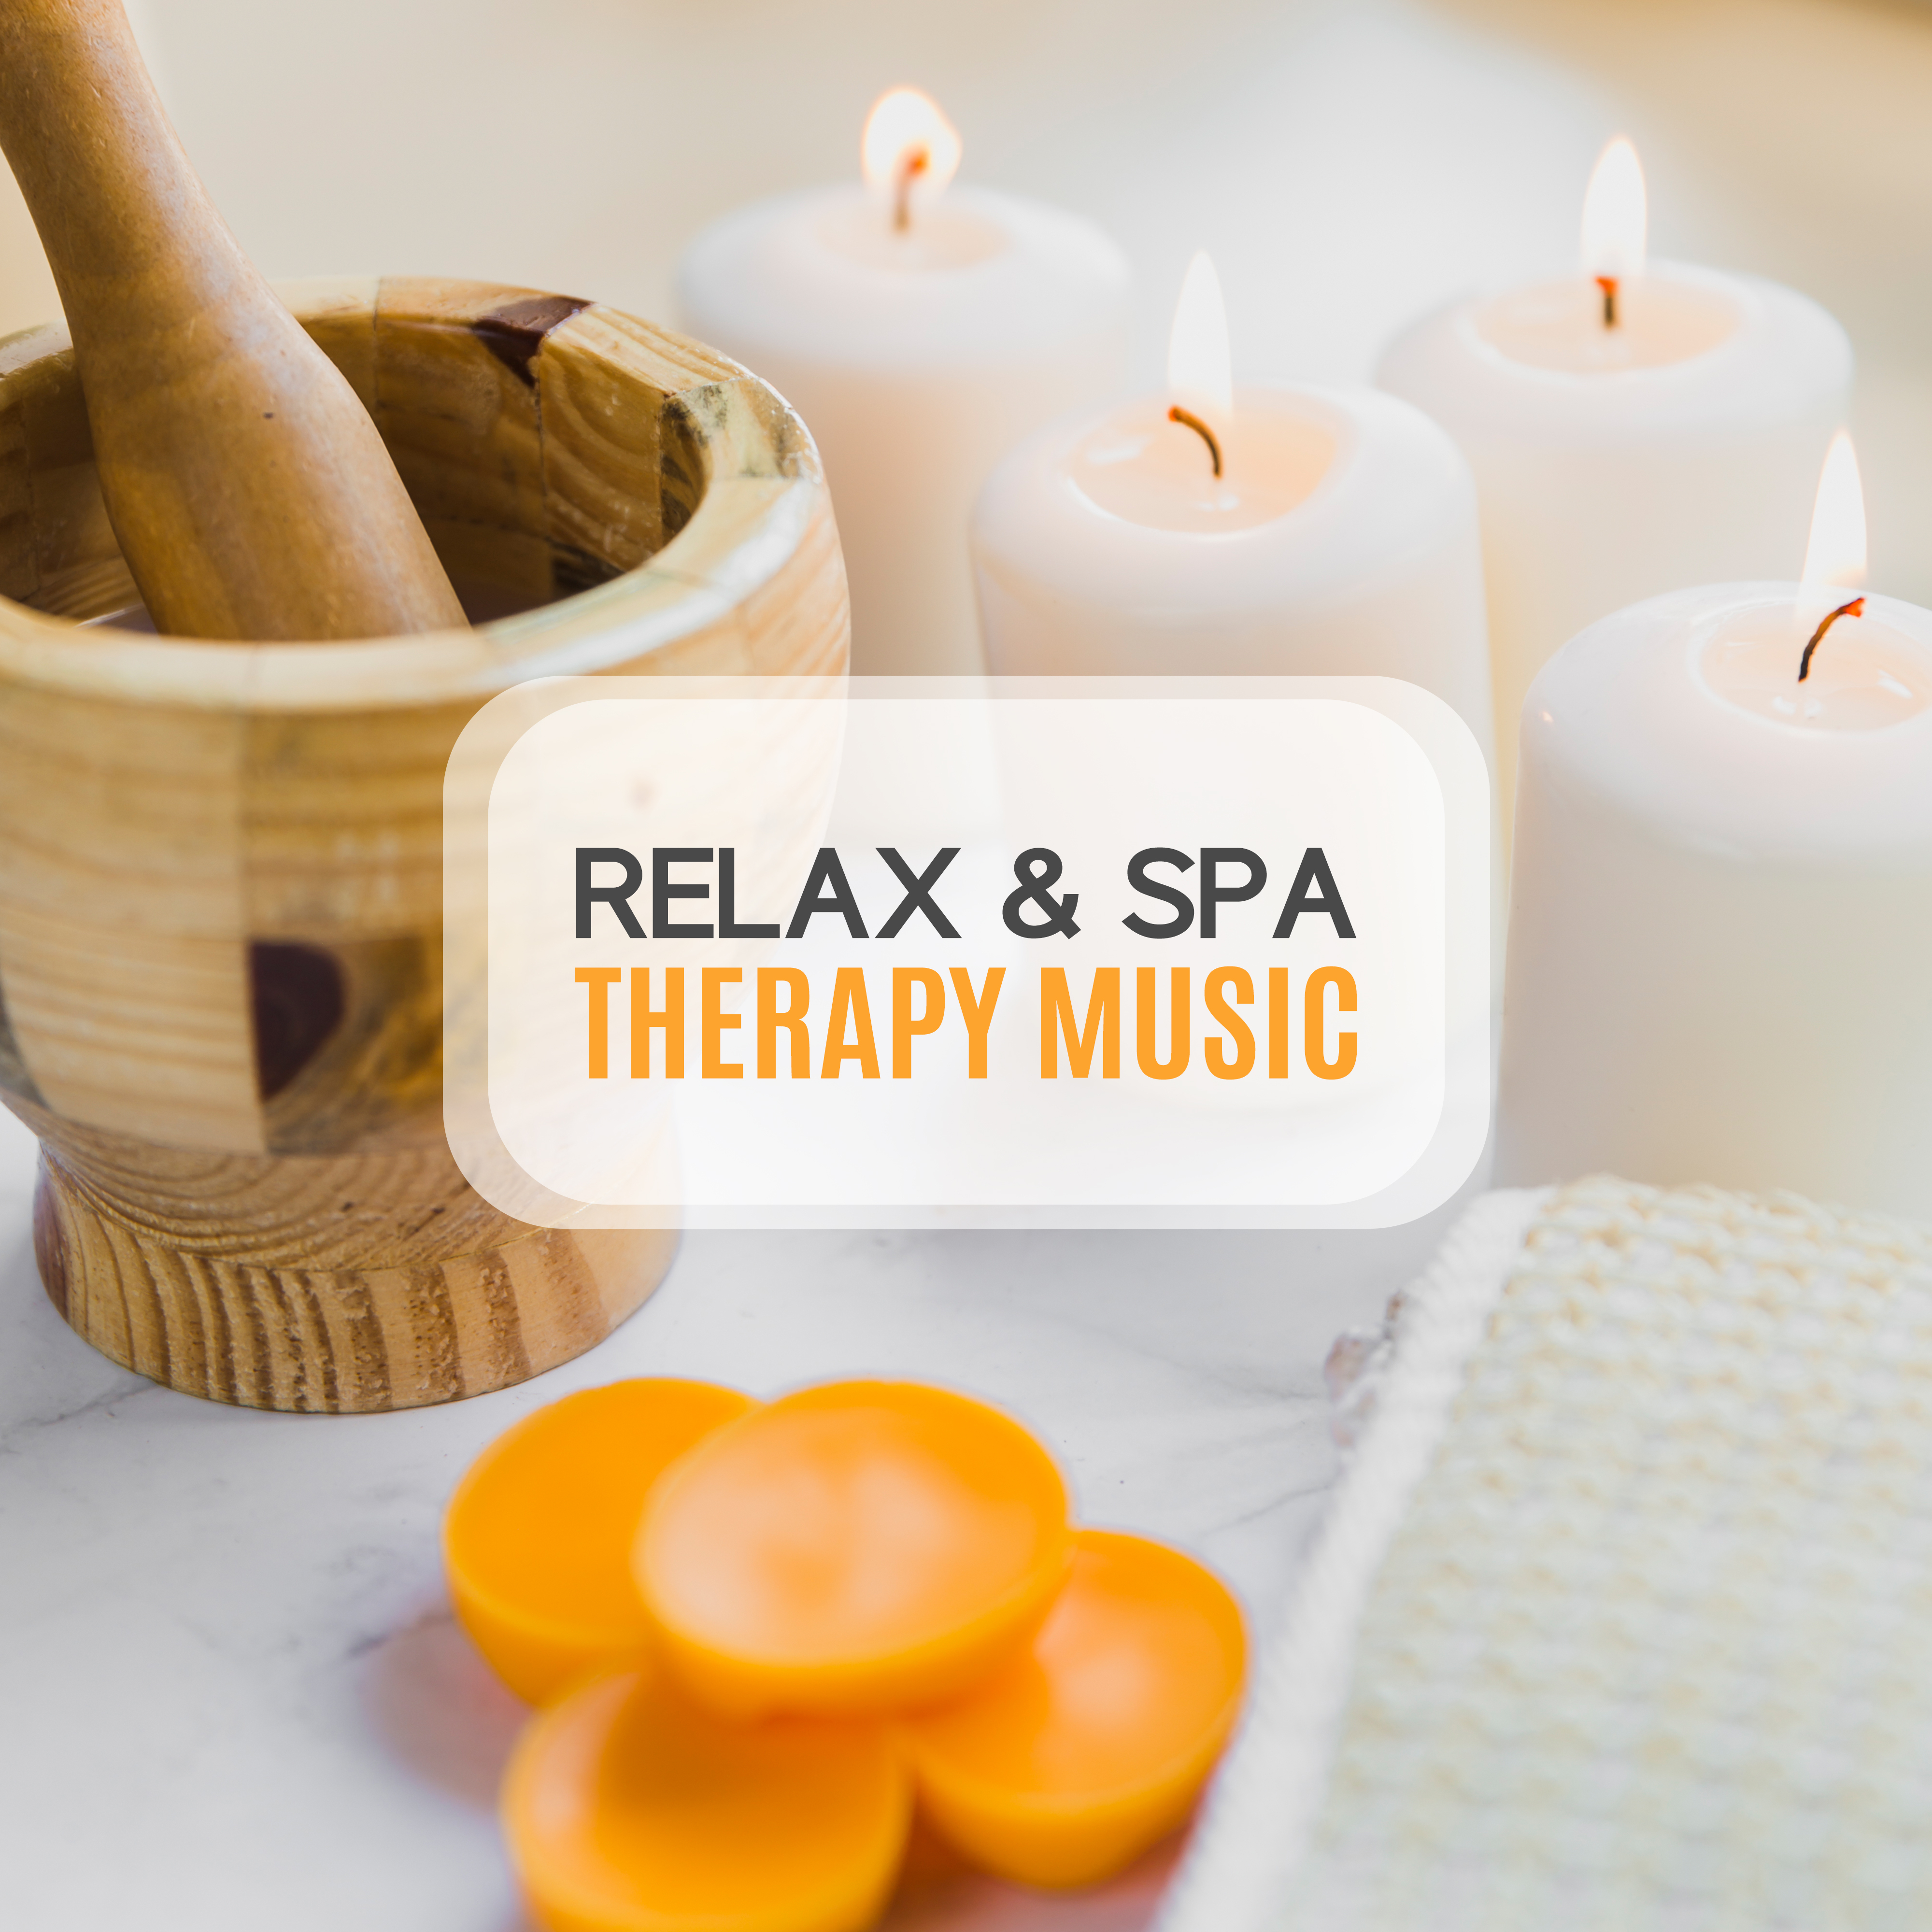 Relax & Spa Therapy Music